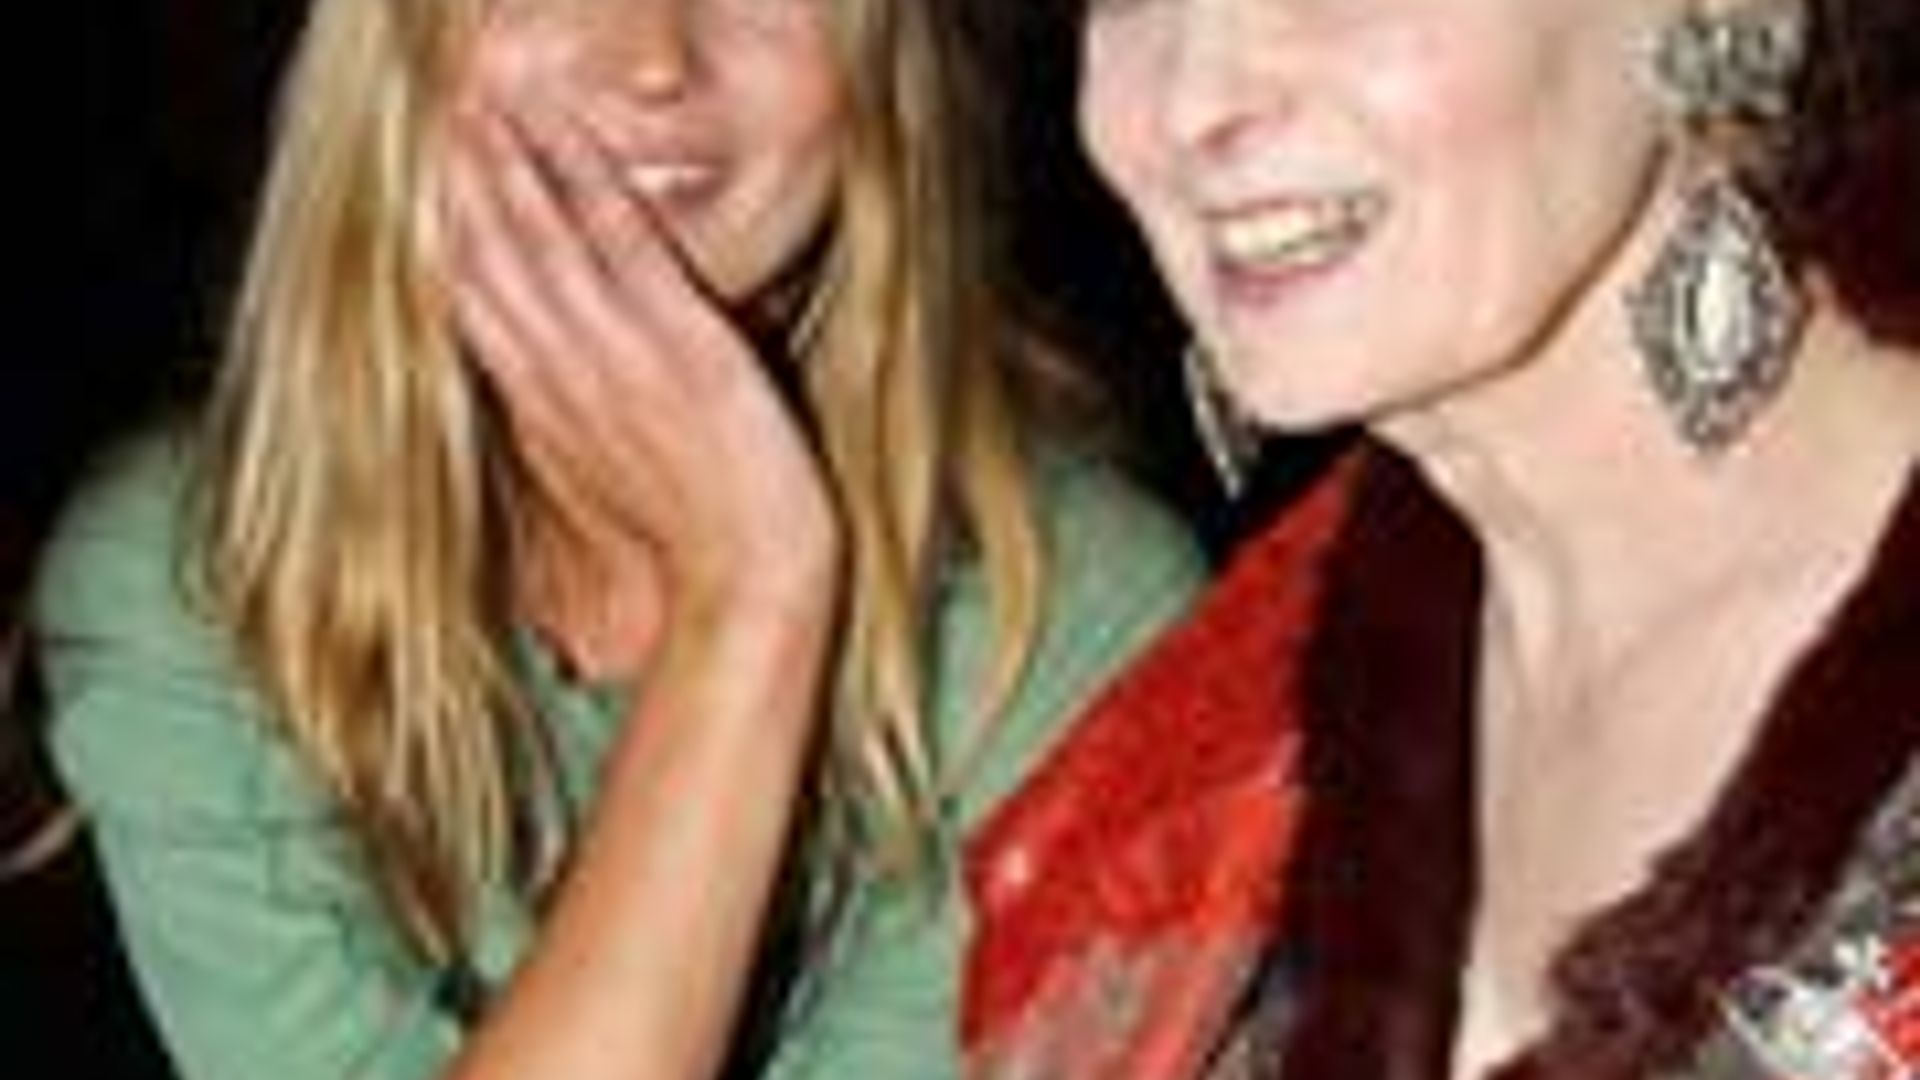 Vivienne Westwood opens up about her friendship with Kate Moss